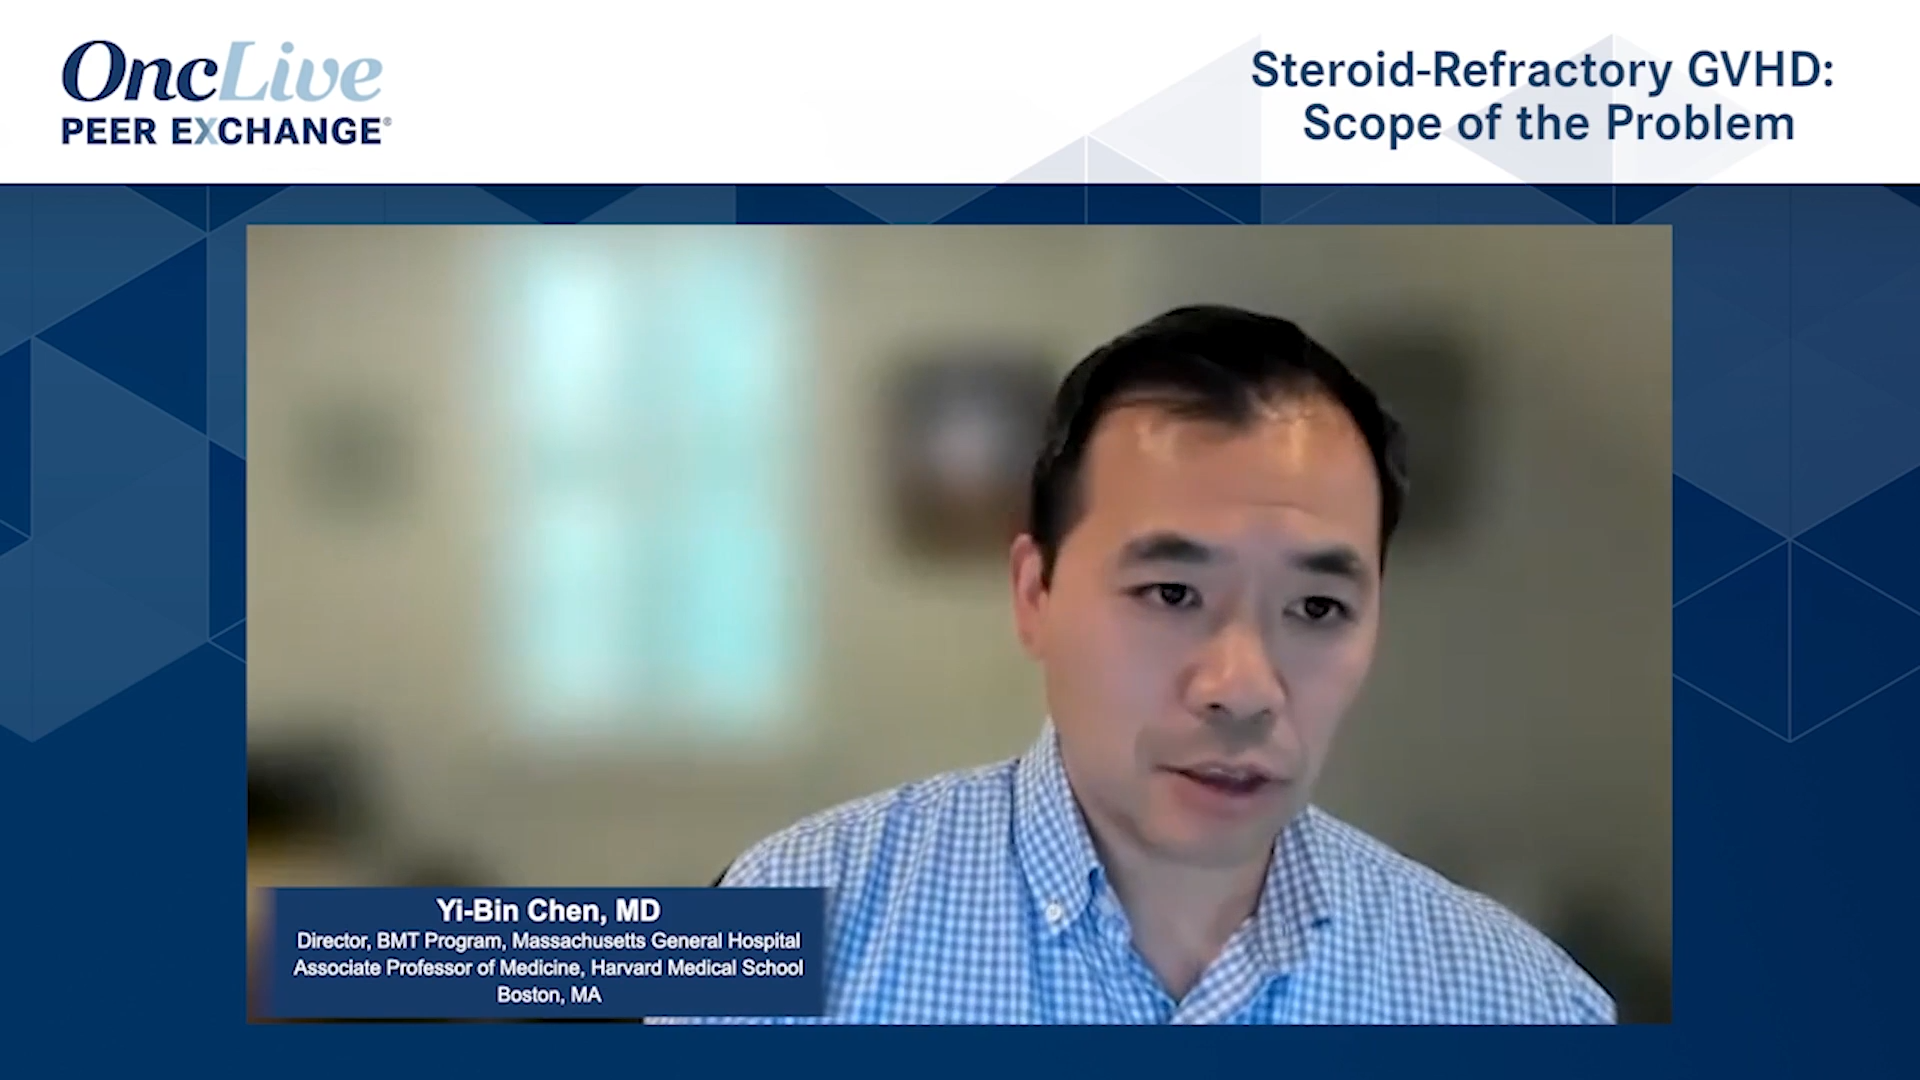 Steroid Refractory GVHD: Scope of the Problem